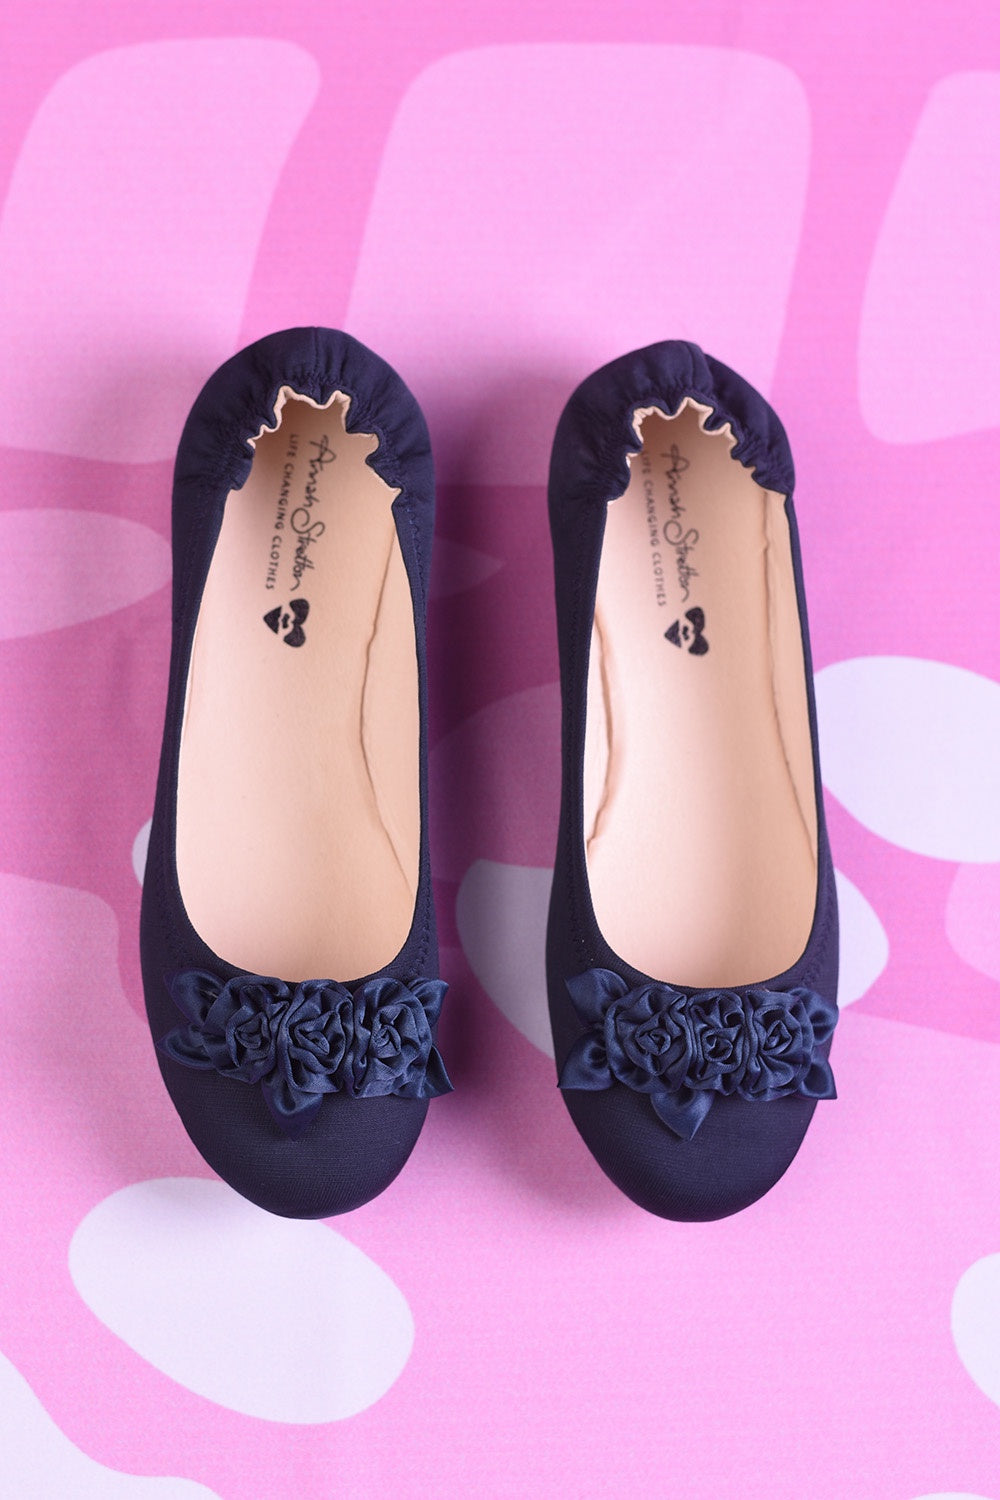 AS Ballet Flat Shoes - Navy - SALE